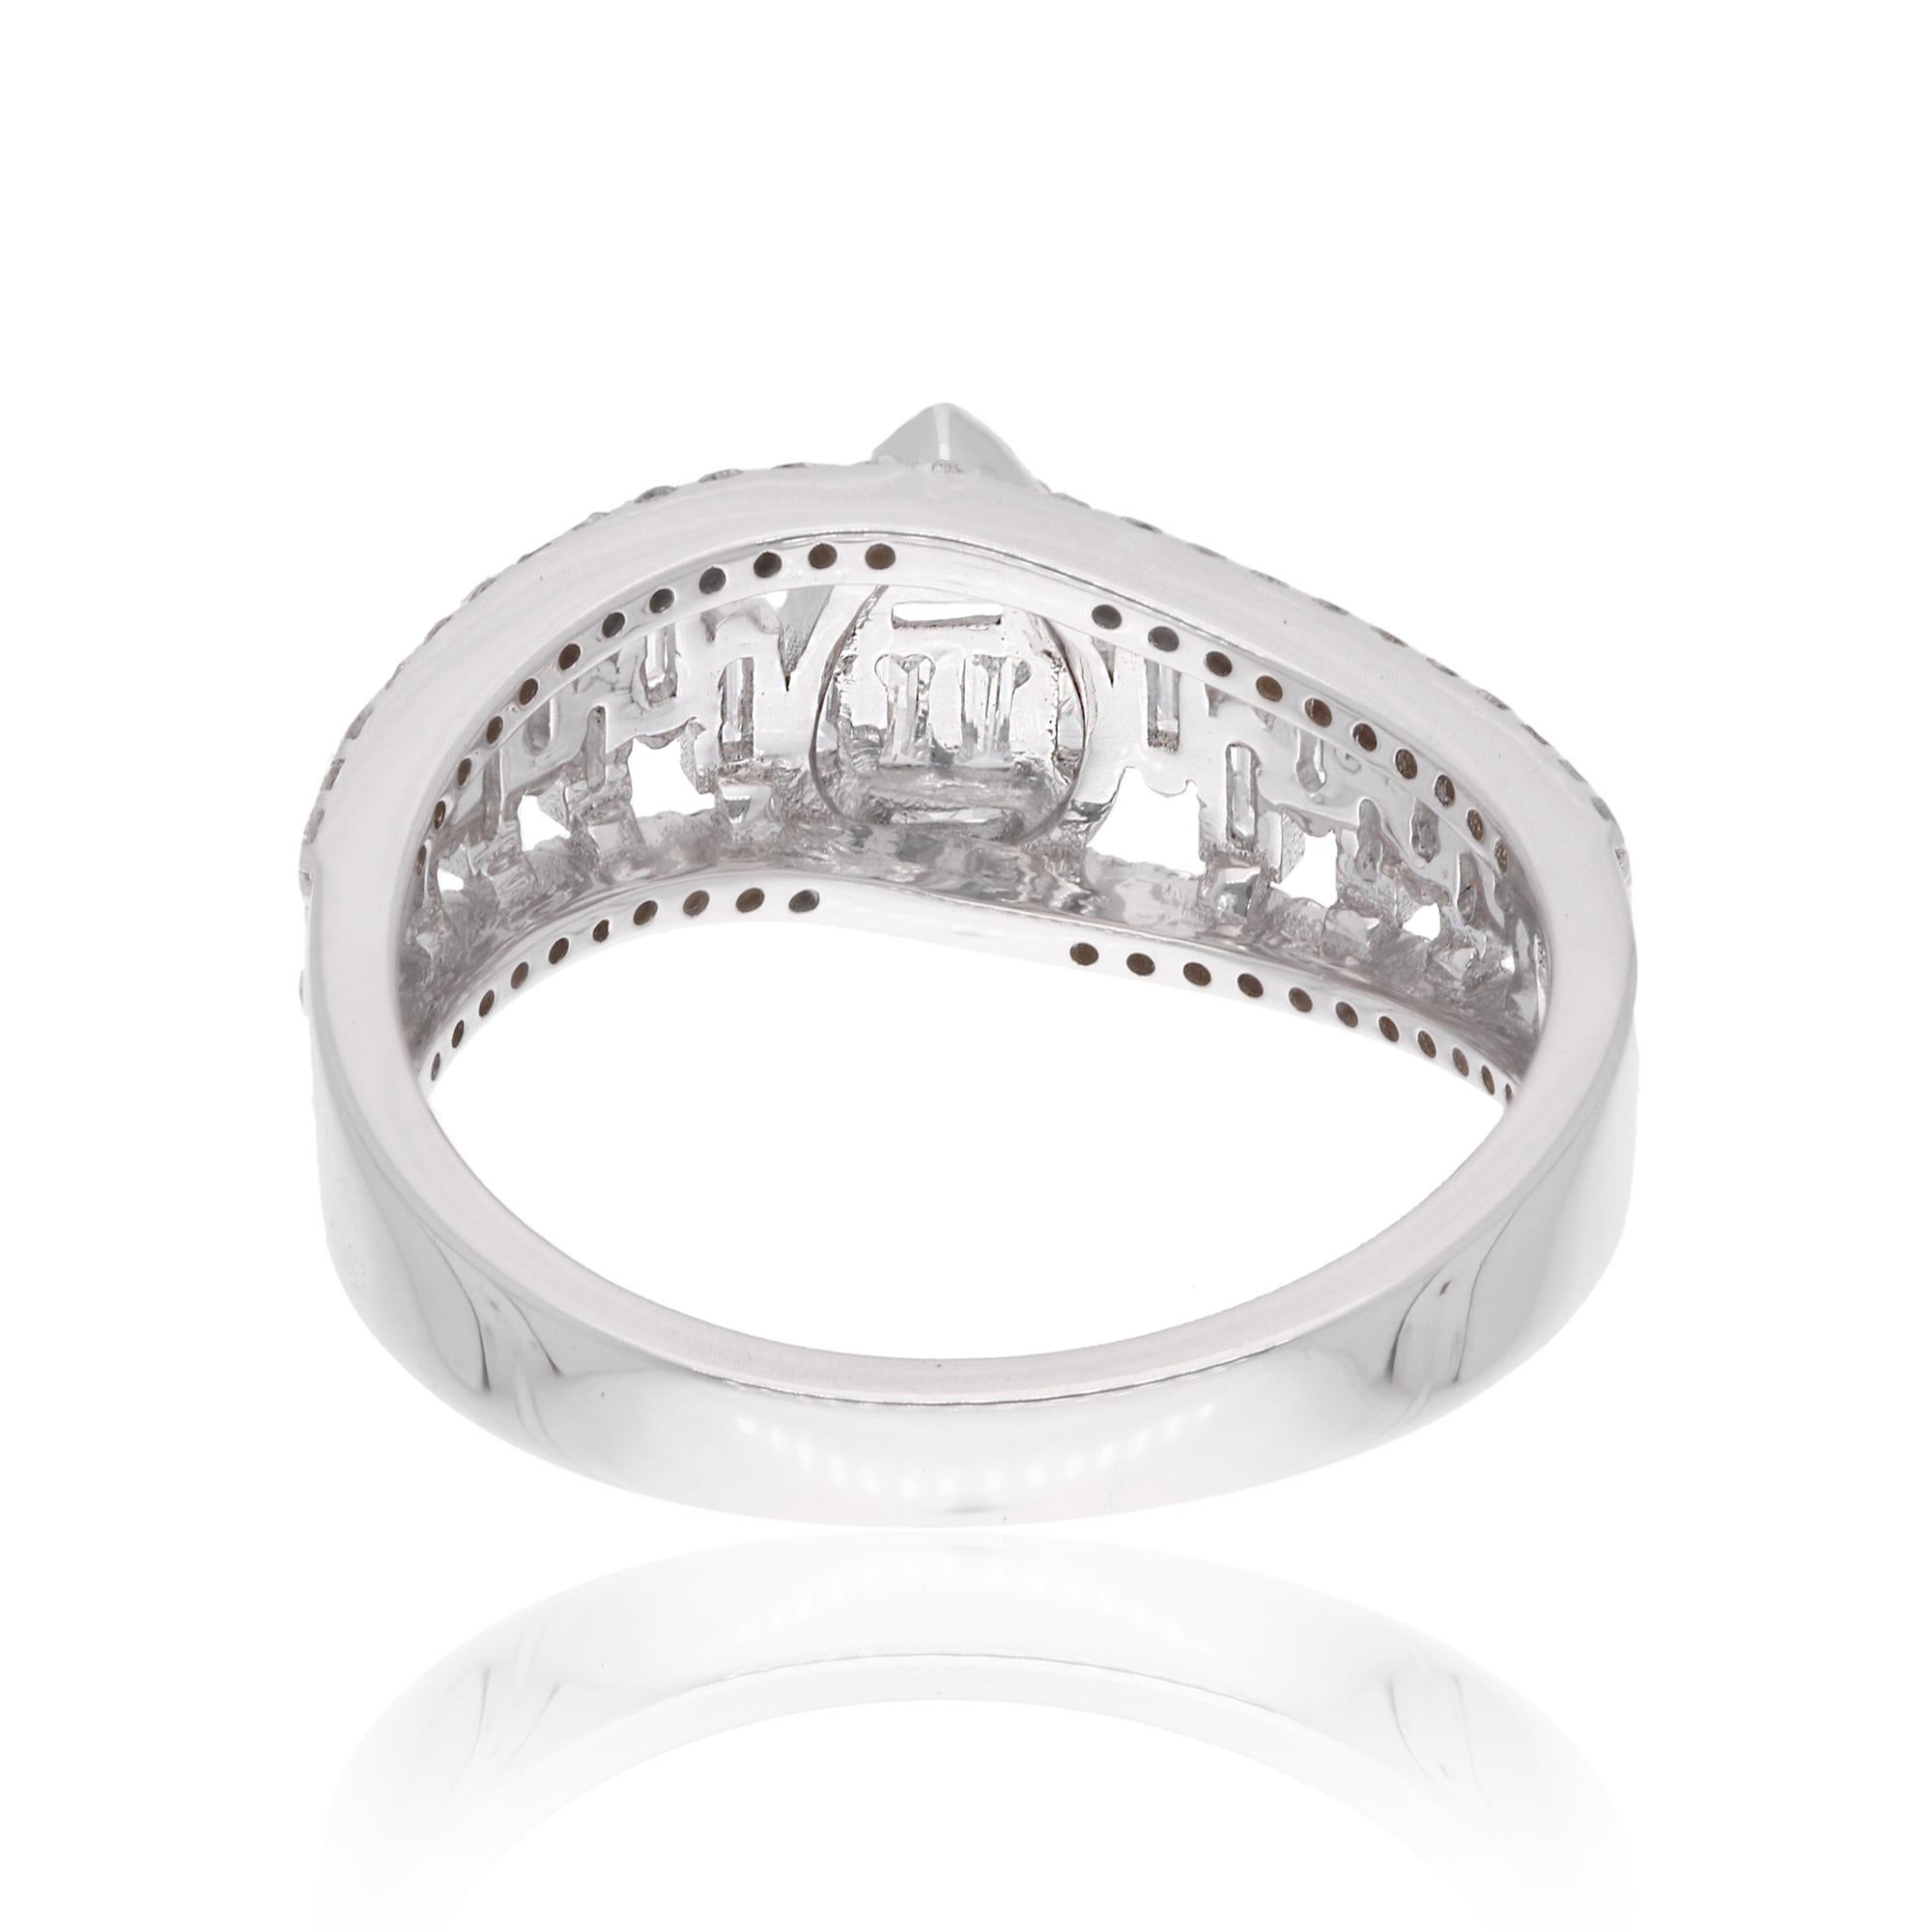 For Sale:  0.73 Ct SI Clarity HI Color Baguette Round Diamond Ring 18 Kt White Gold Jewelry 3